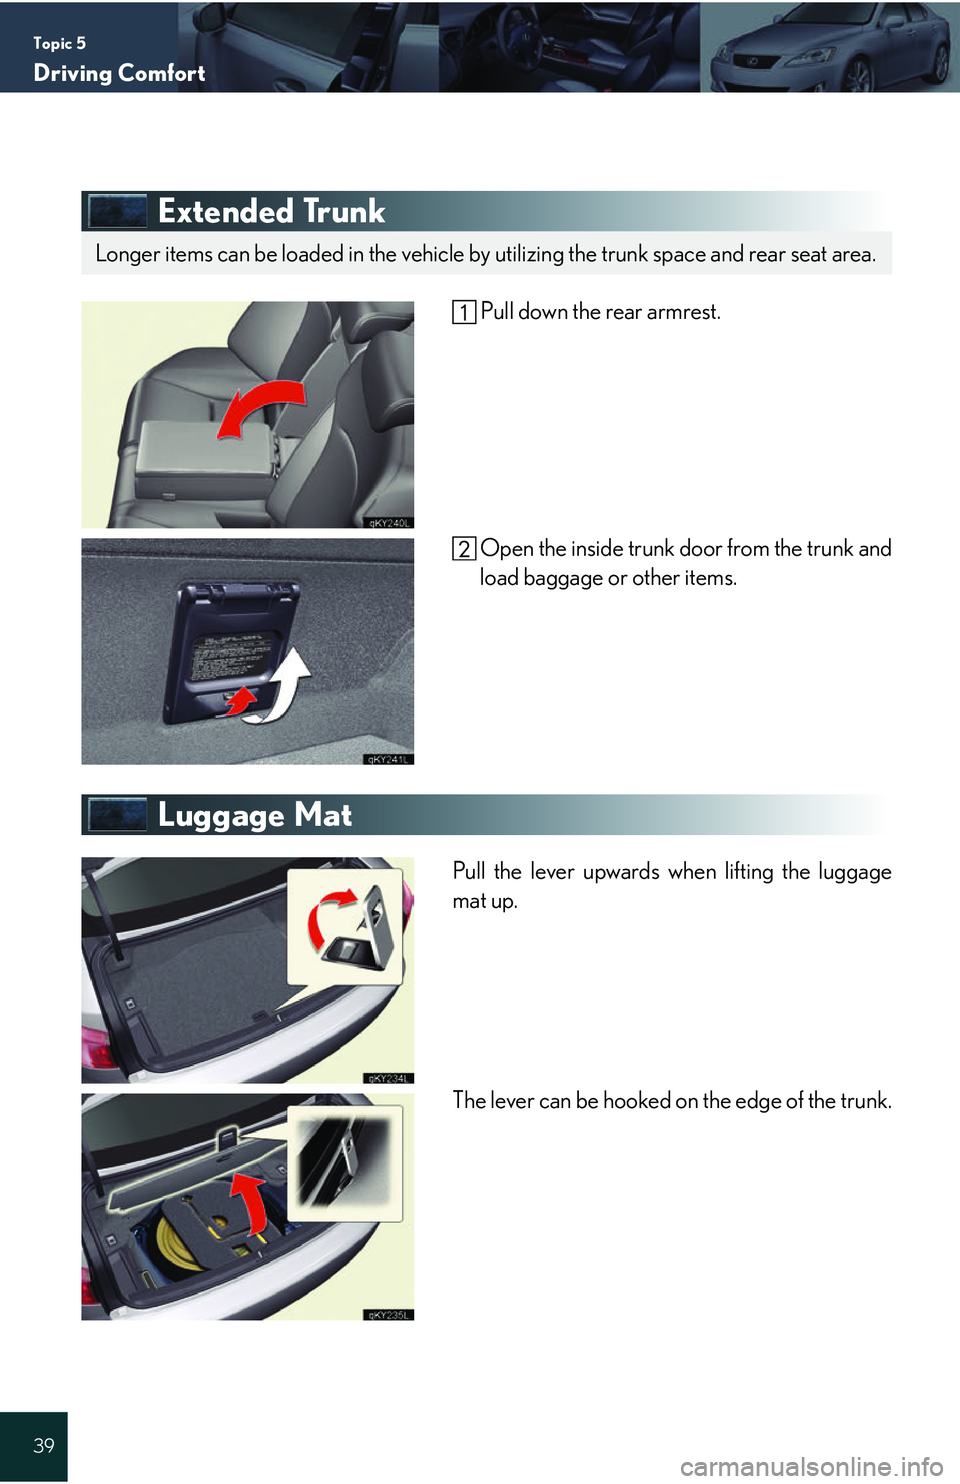 Lexus IS250 2006  Audio/video System / LEXUS 2006 IS350/250 QUICK REFERENCE GUIDE Topic 5
Driving Comfort
39
Extended Trunk
 Pull down the rear armrest.Open the inside trunk door from the trunk and
load baggage or other items.
Luggage Mat
Pull the lever upwards when lifting the lug